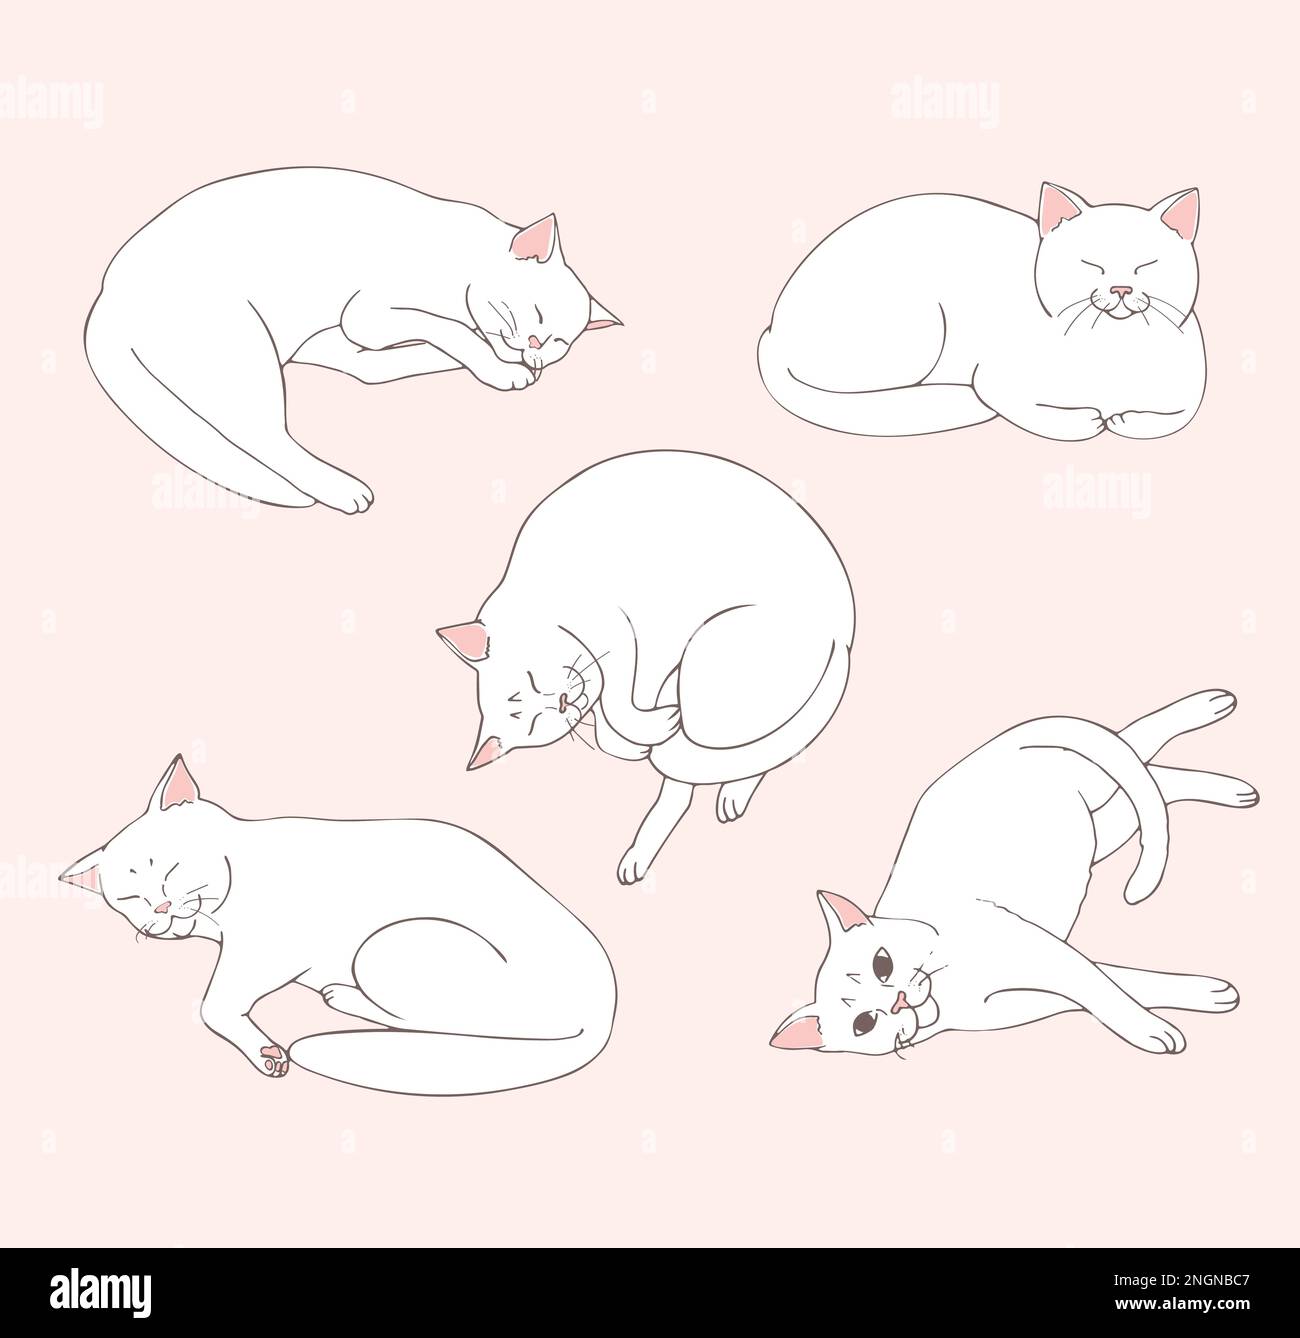 How to Draw a Sleeping Cat step by step  Easy Animals 2 Draw